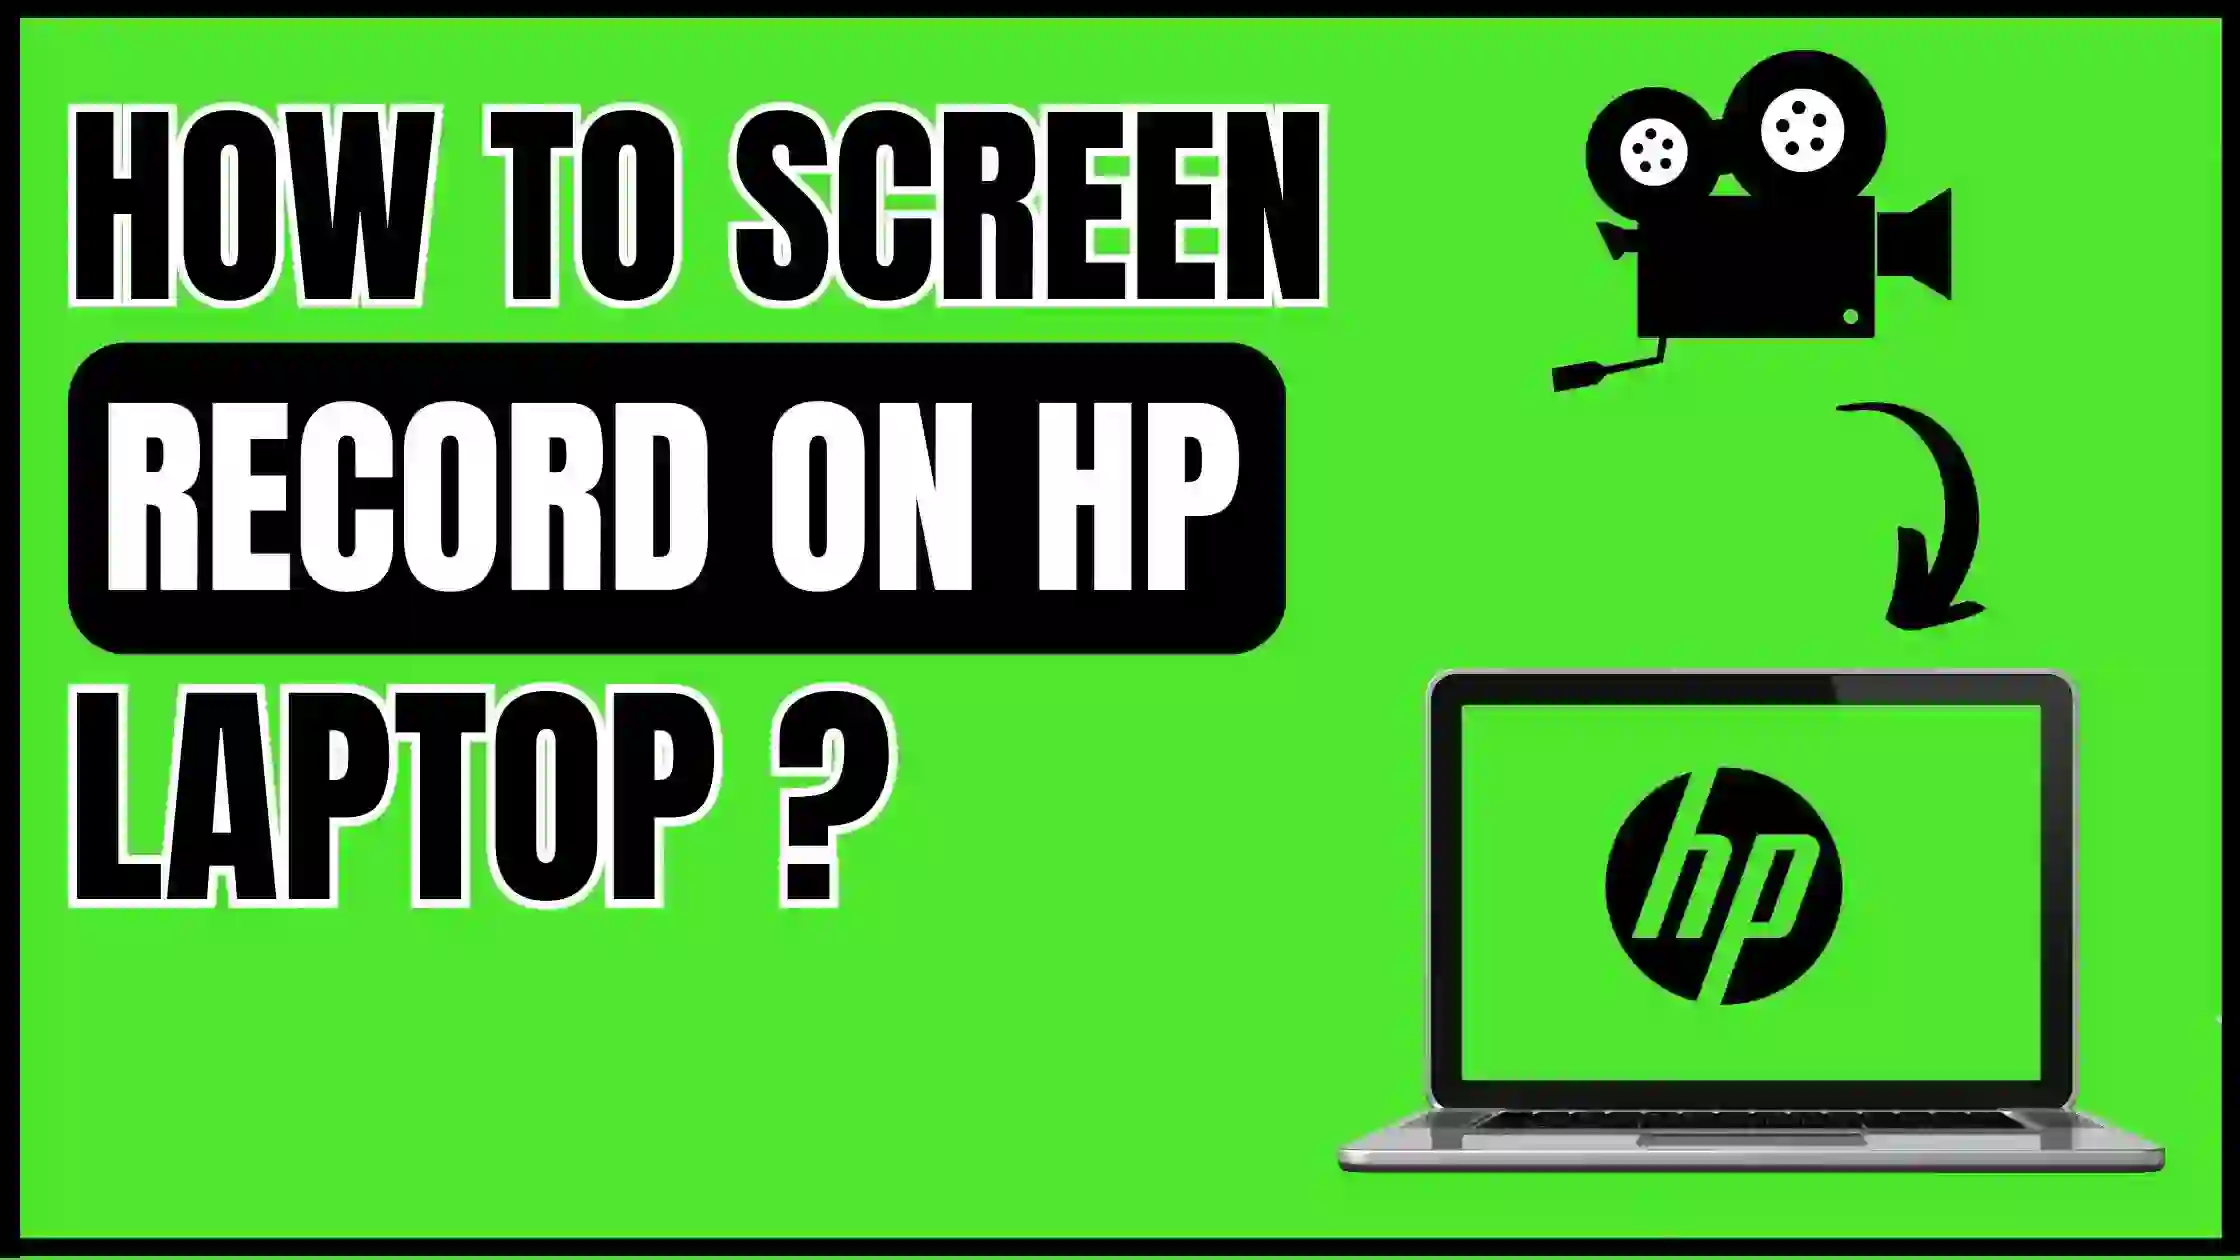 HOW TO SCREEN RECORD ON HP LAPTOP